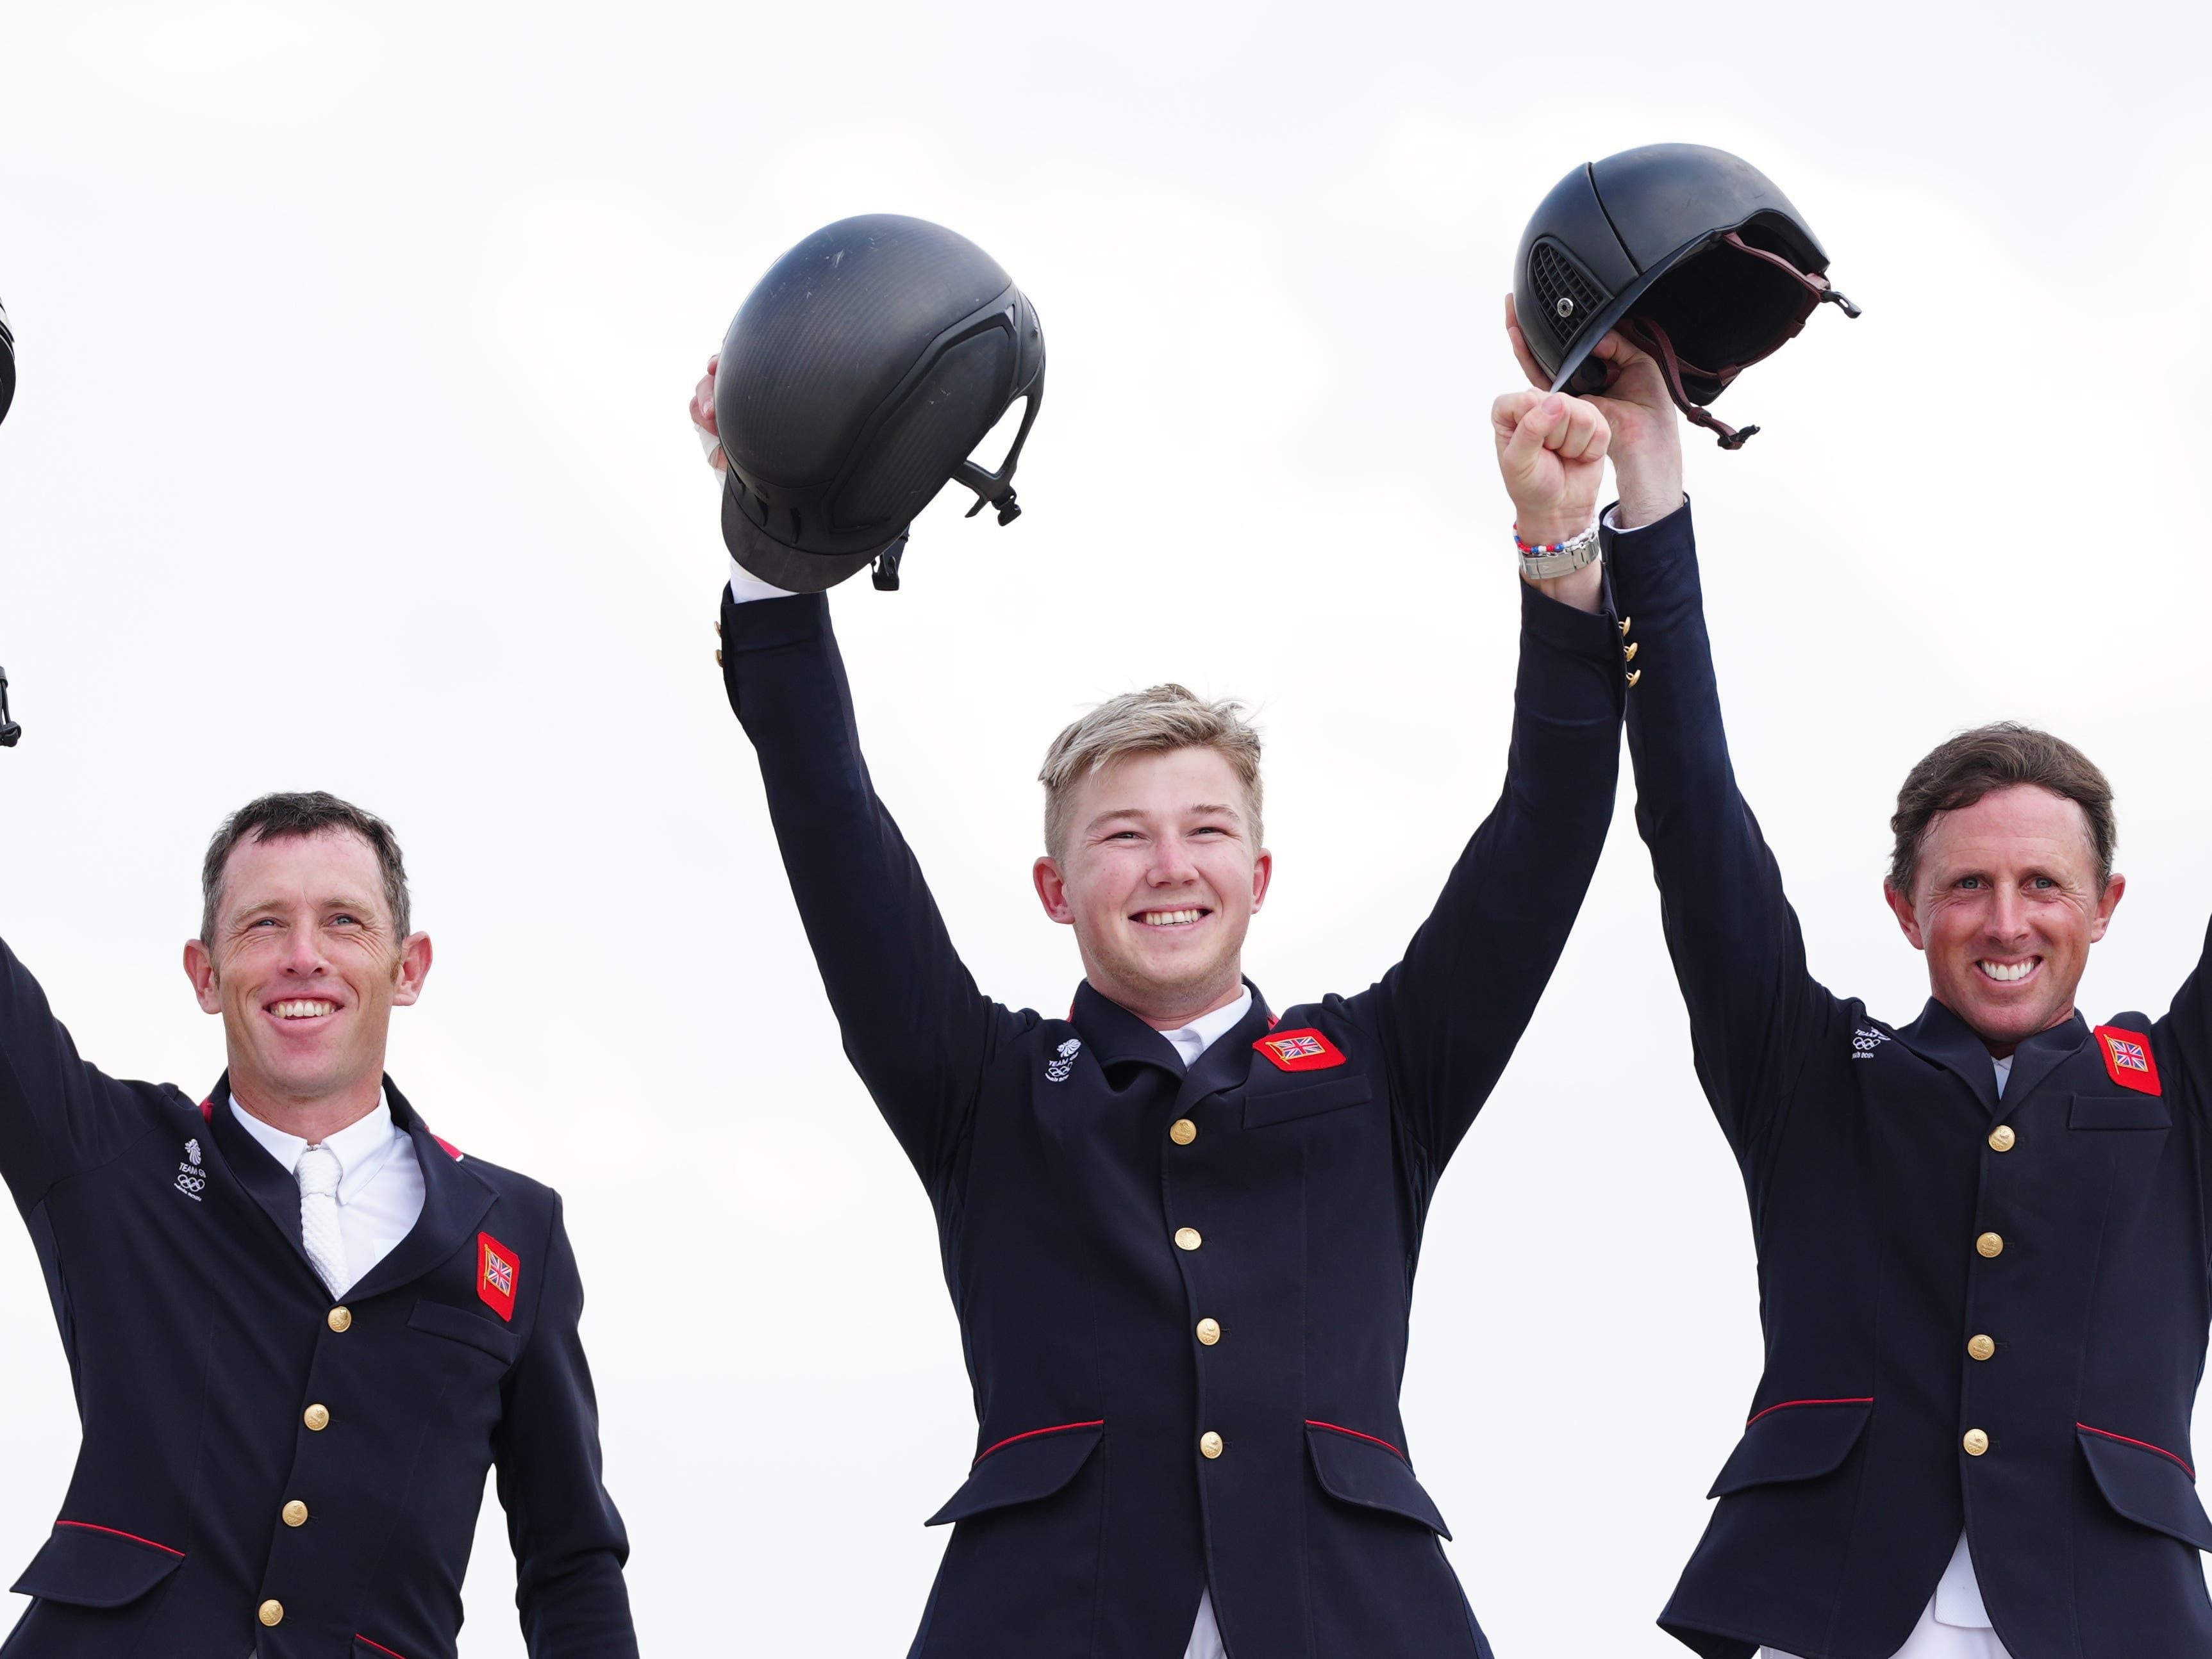 ‘Best day ever’ – sister celebrates Harry Charles’s jumping team gold